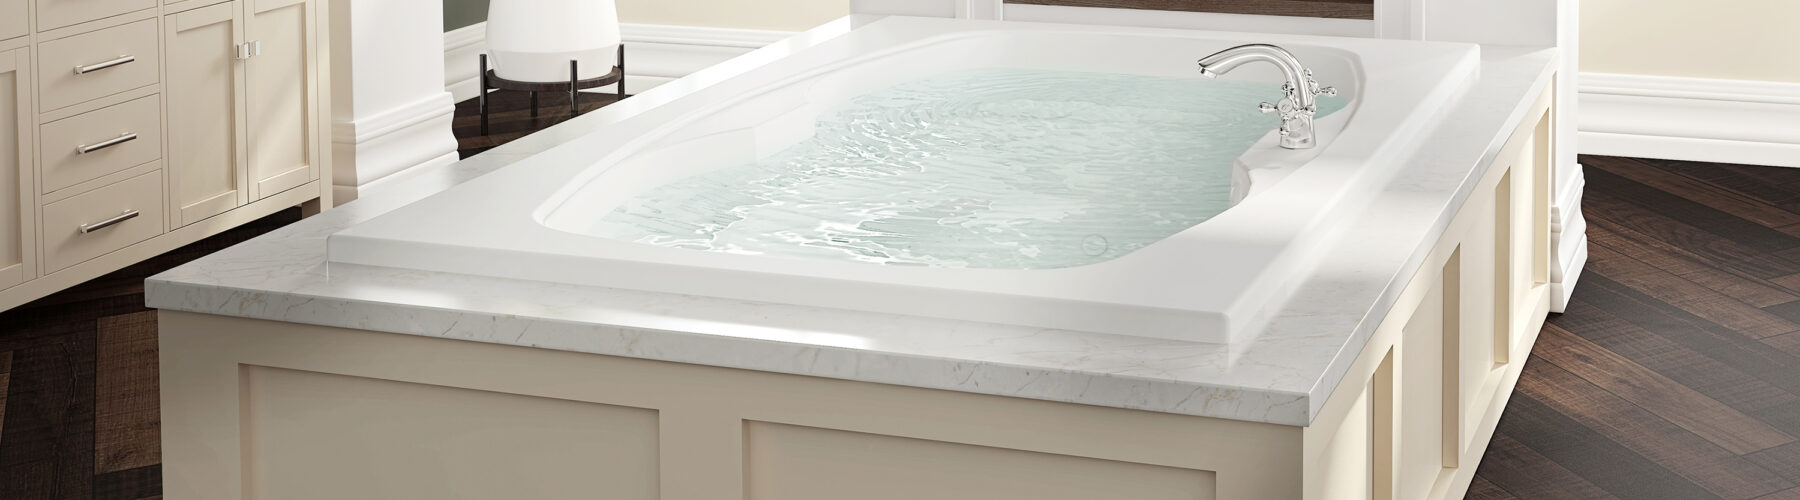 Are Hydrotherapy Jets in Bathtubs Worth the Investment?